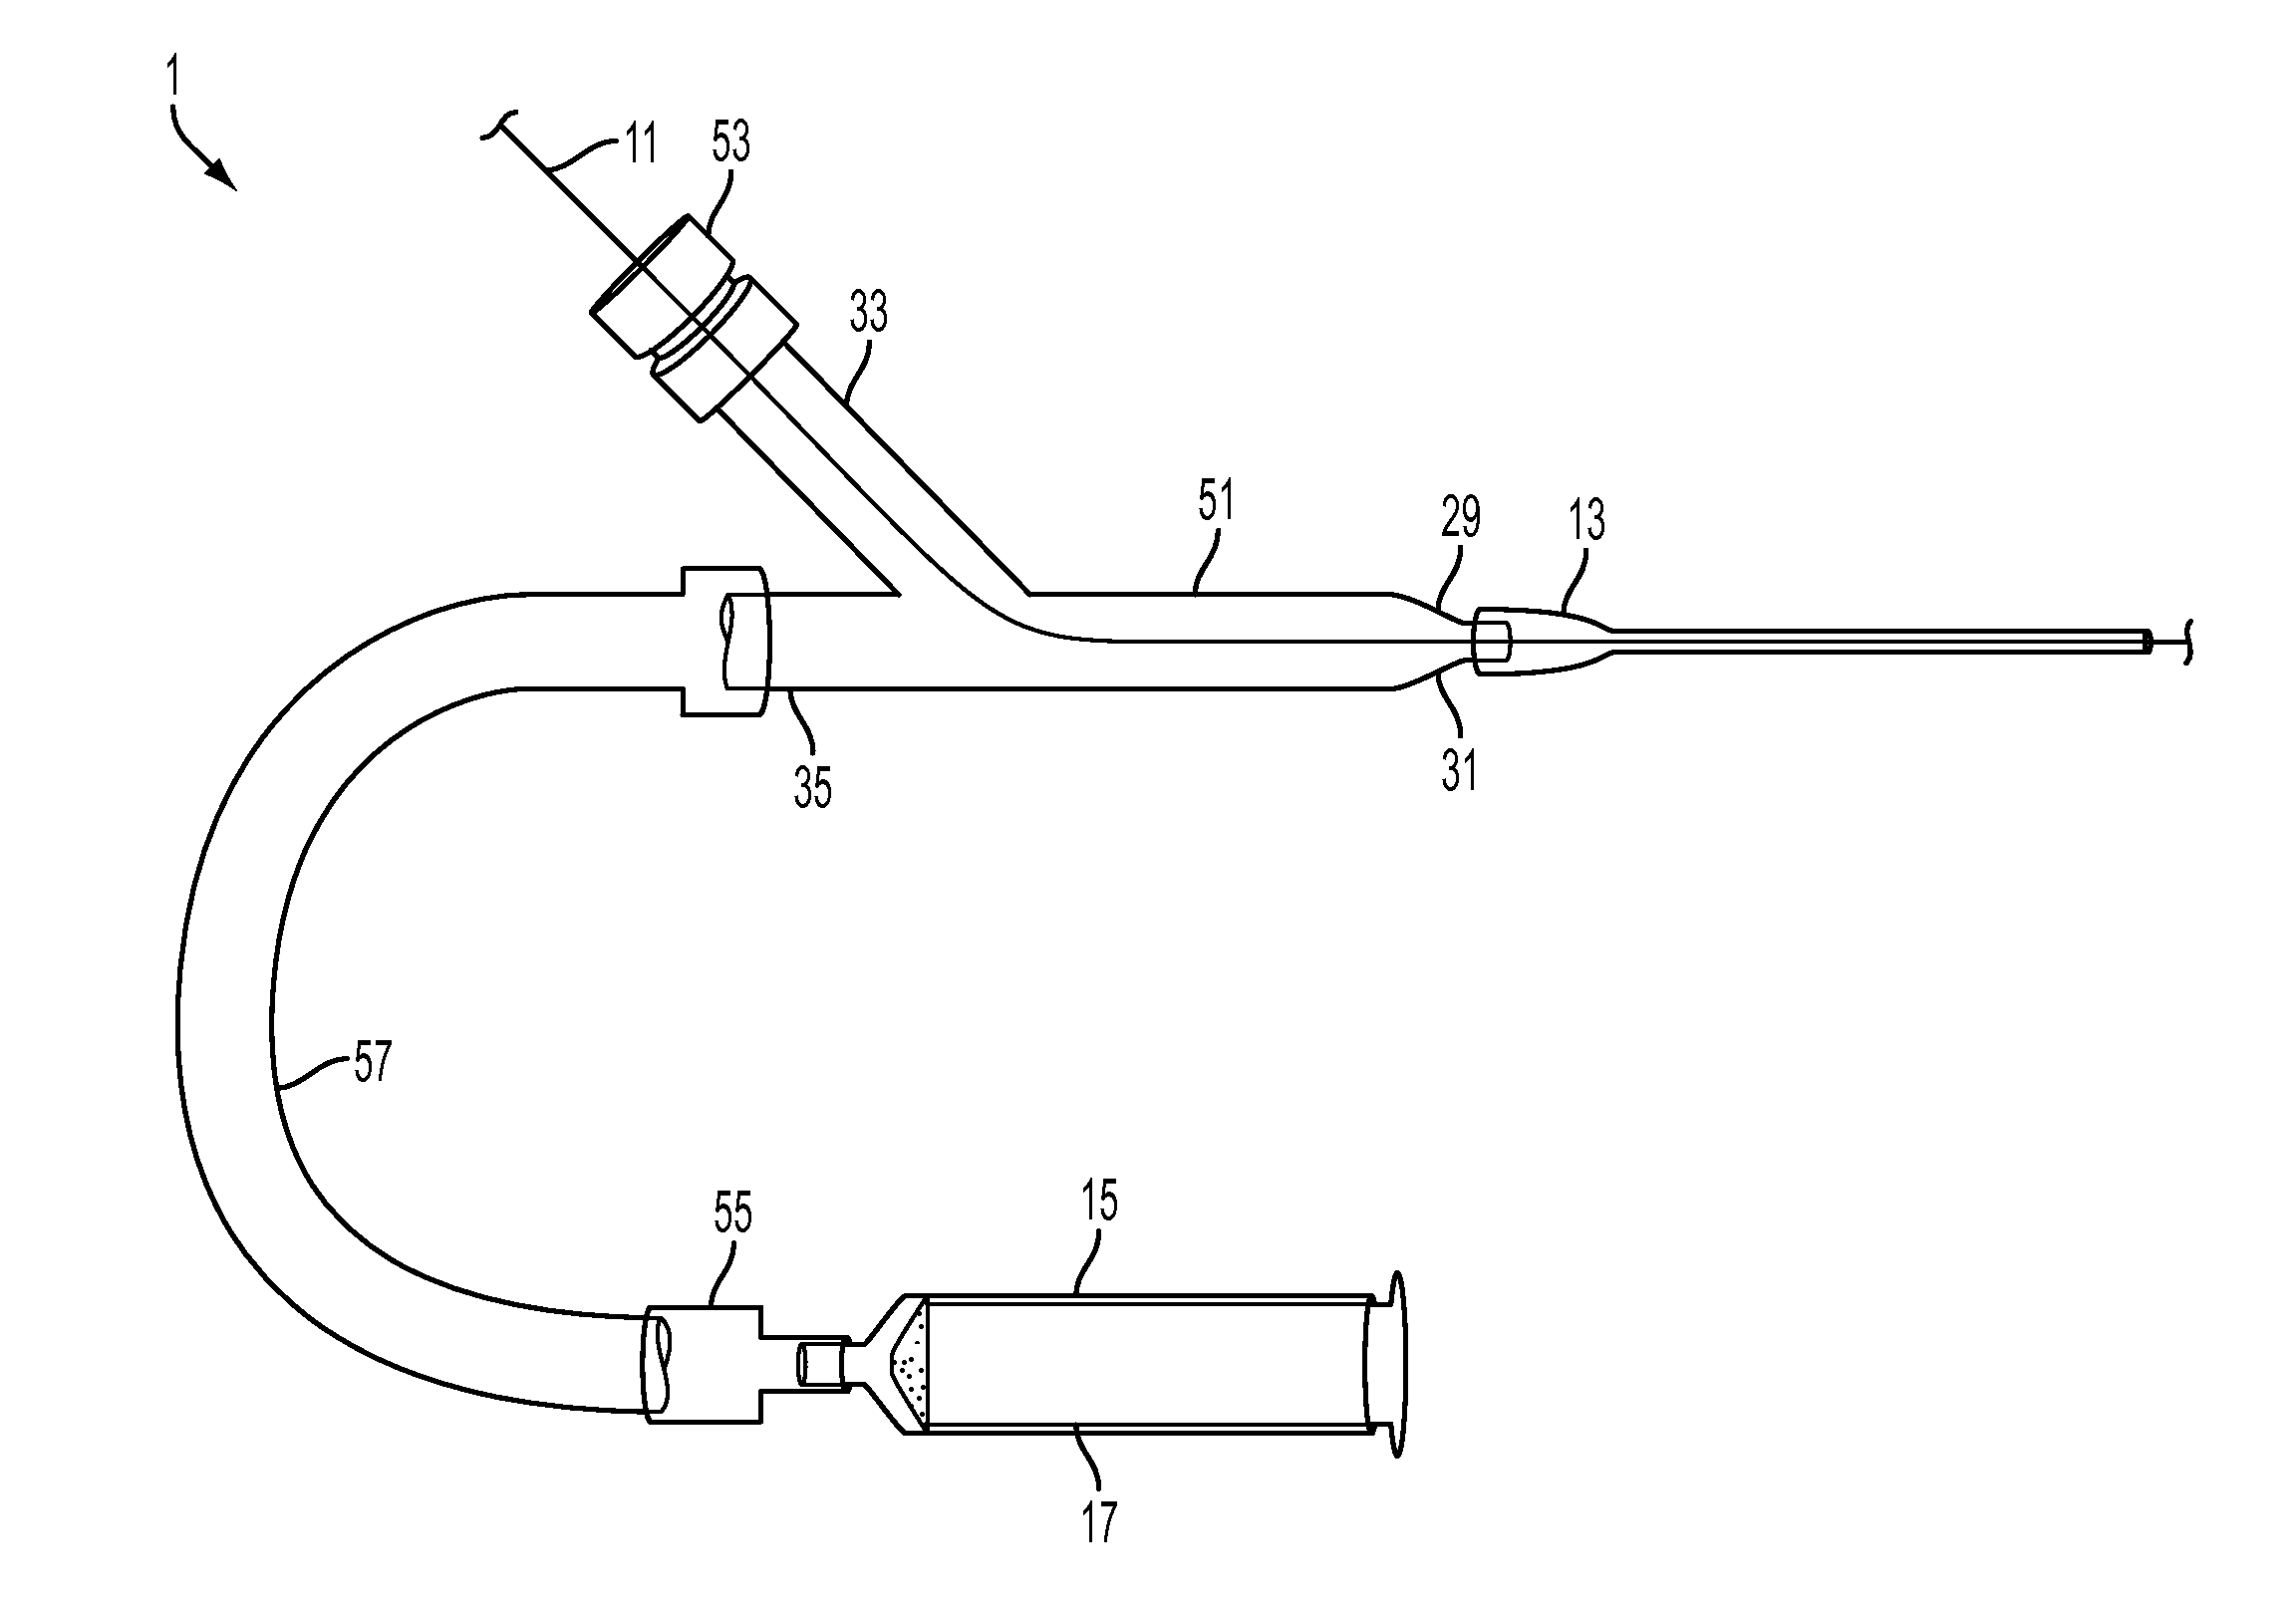 Access system for femoral vasculature catheterization and related method